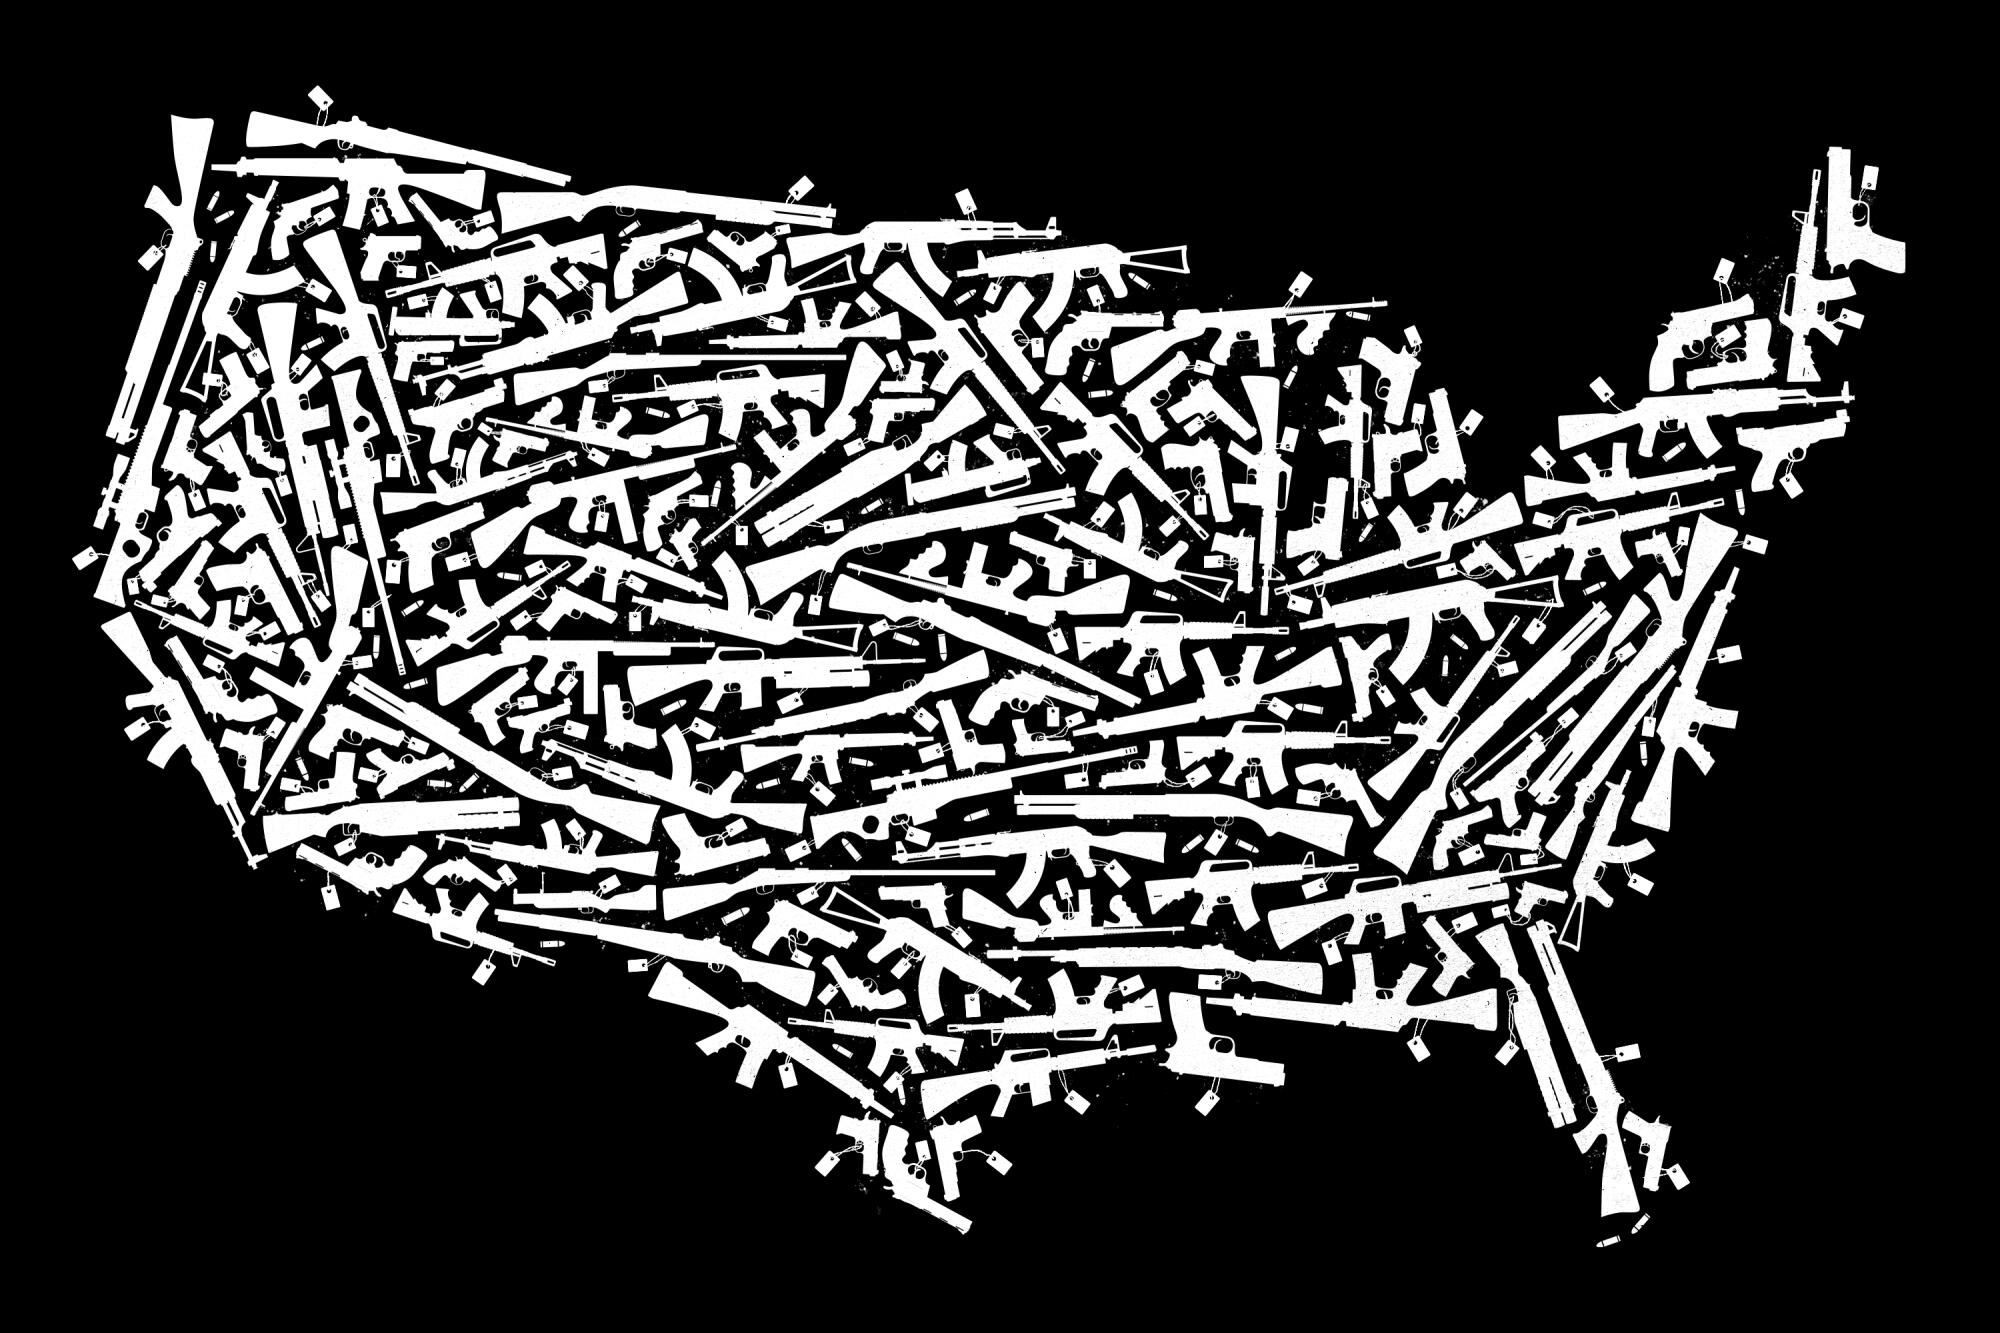 Illustration of the U.S. formed by silhouettes of guns with price tags on a black background.